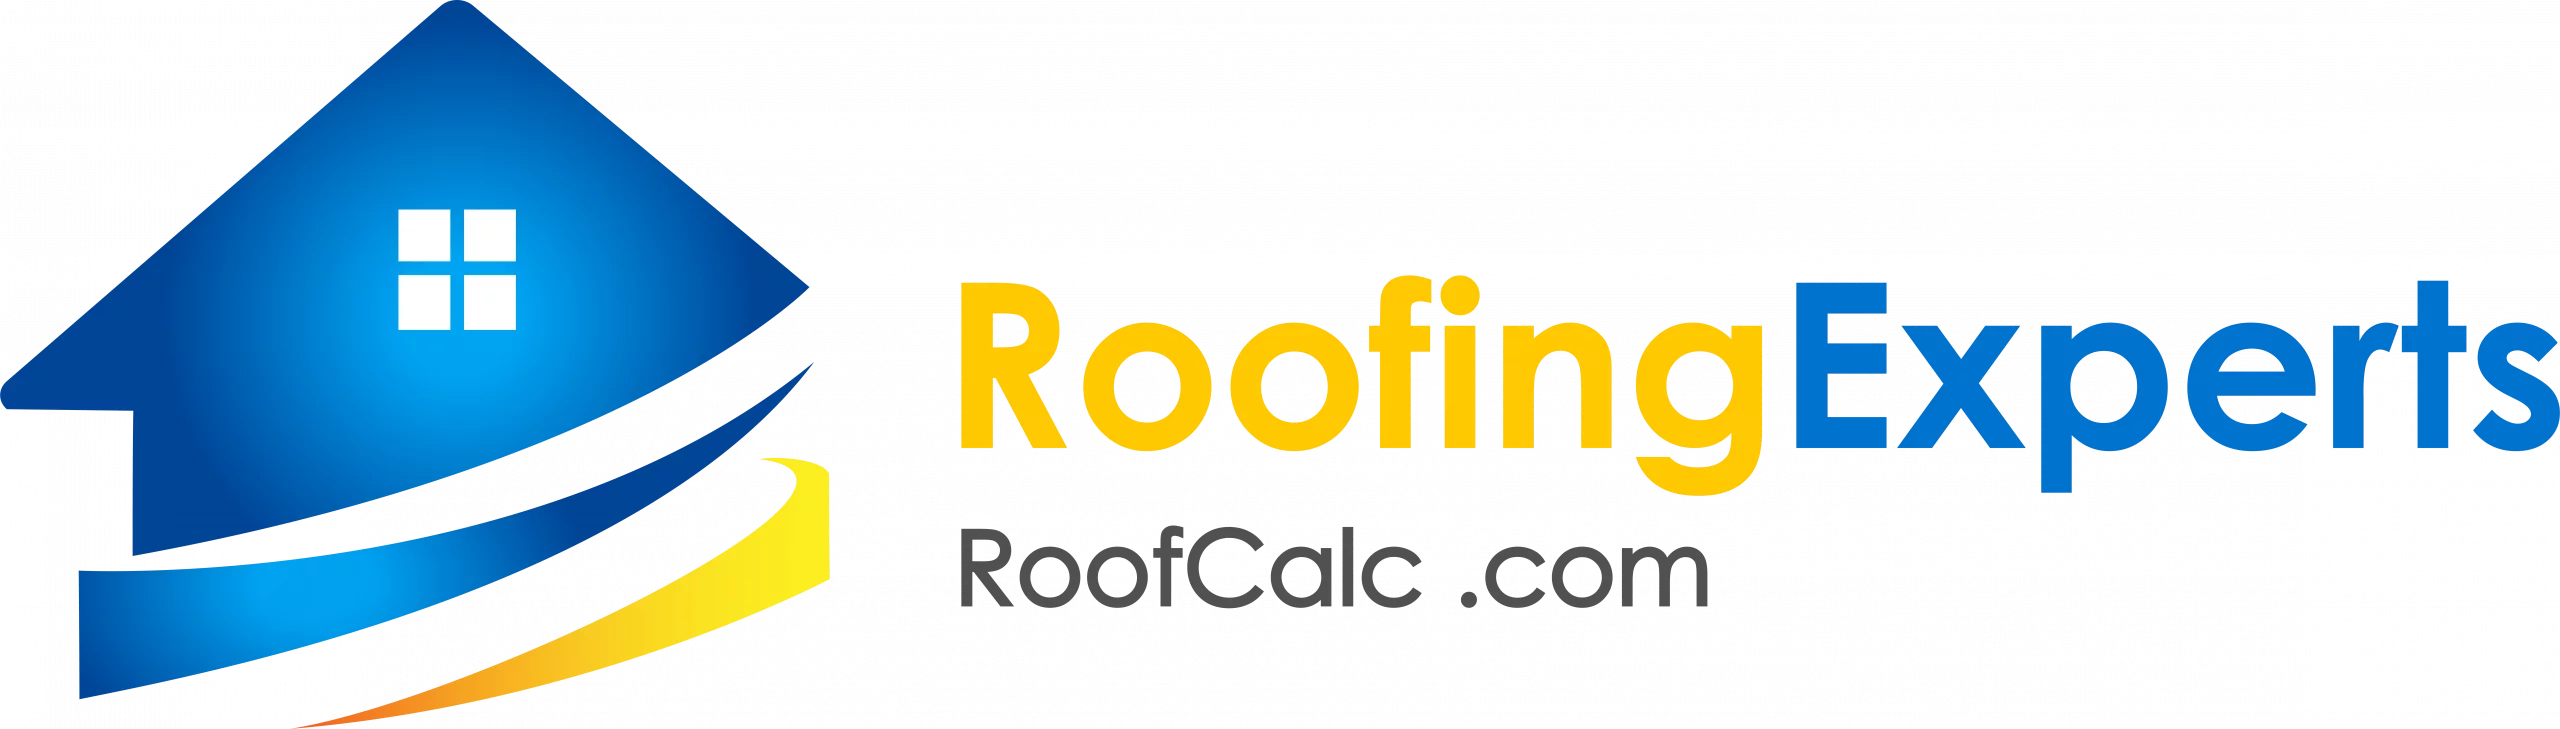 Roofing Experts | Roof Calc